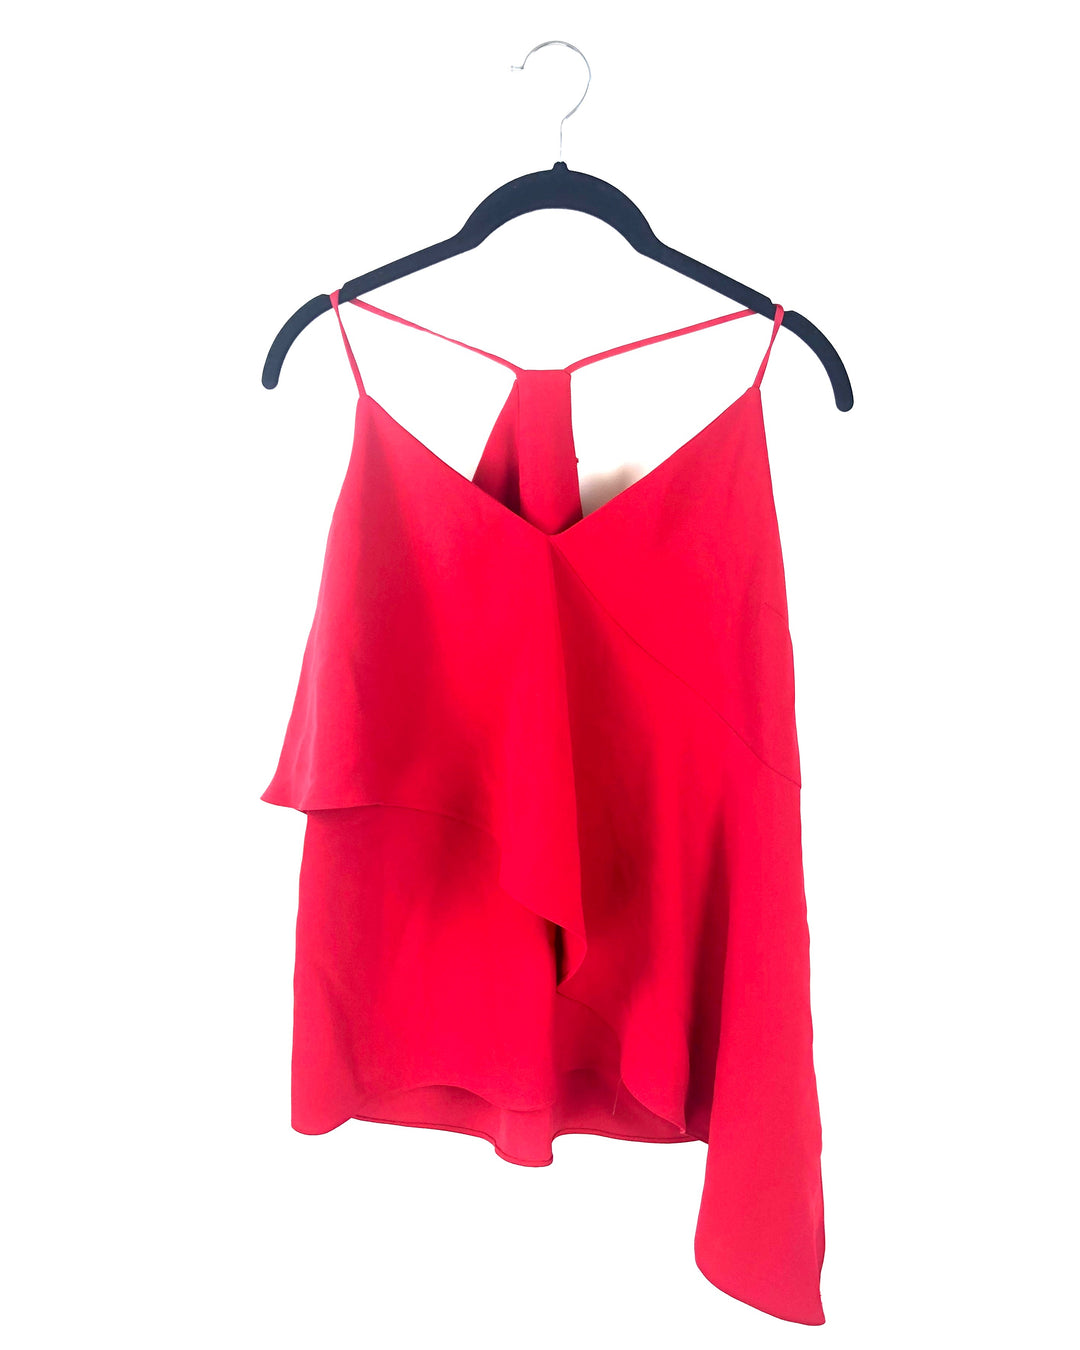 Red Ruffle Top - Small